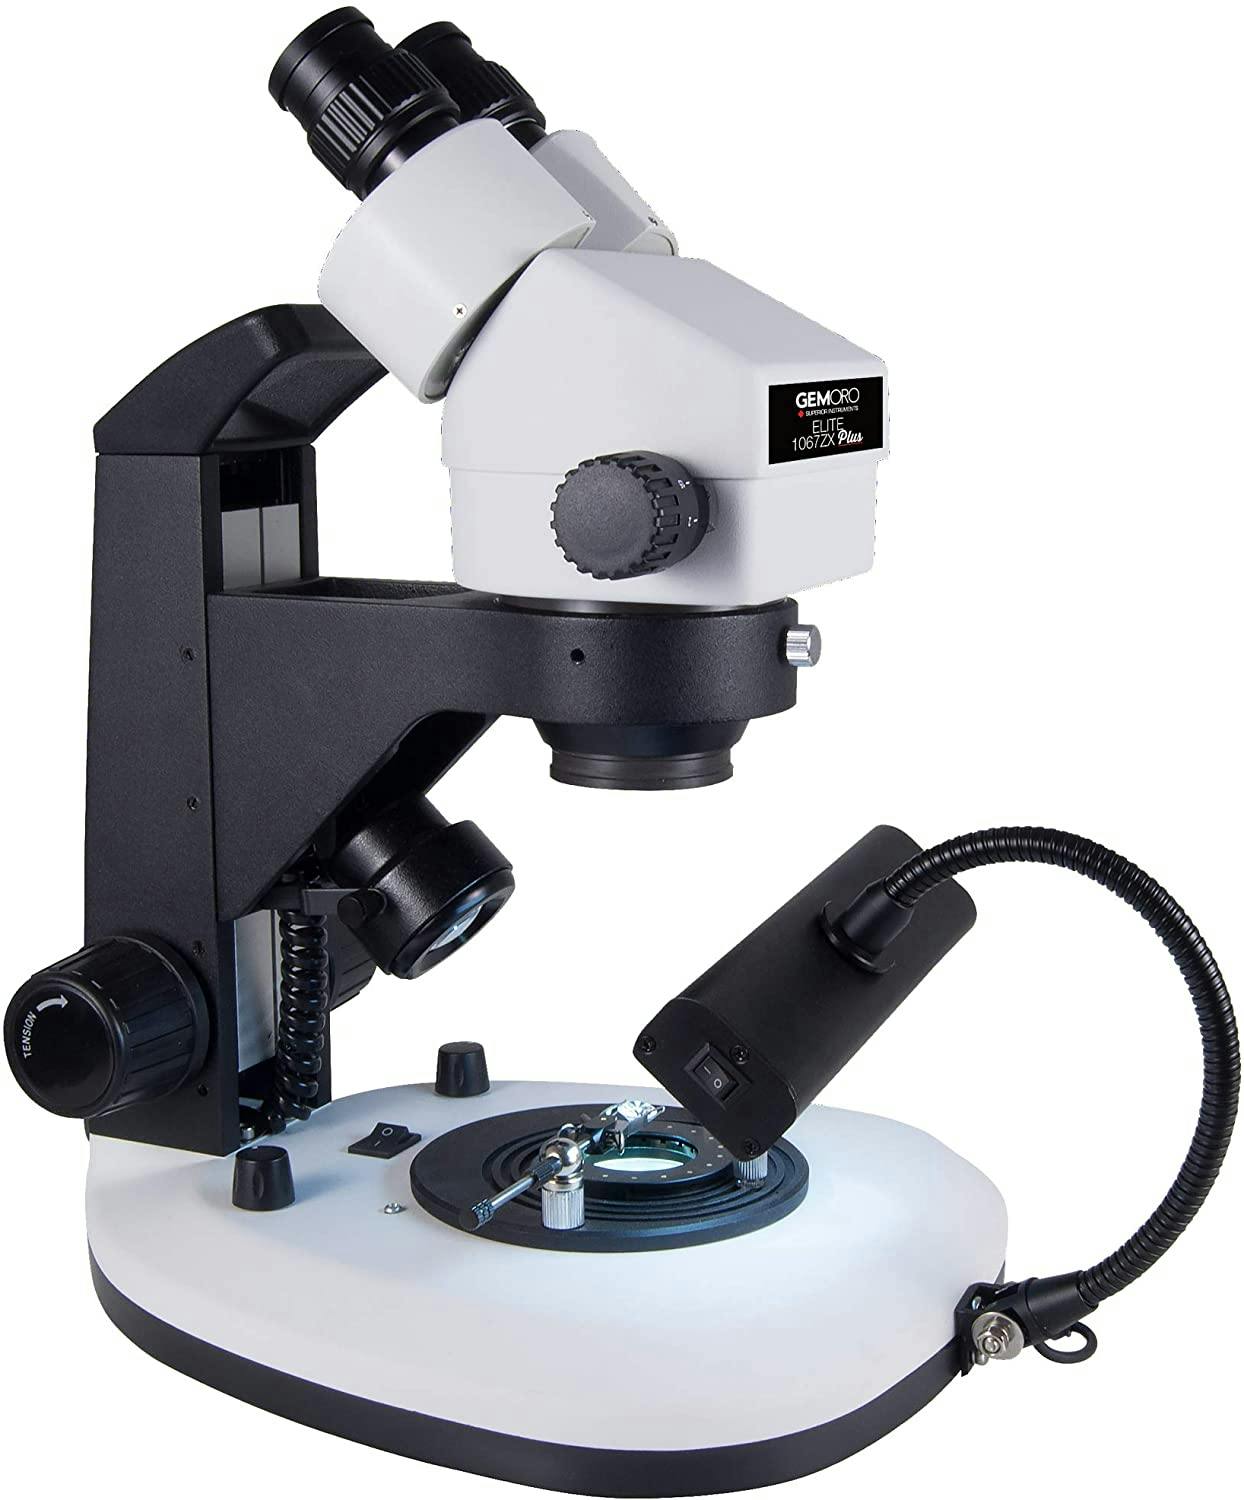 The Best Jeweler’s Microscopes Of 2023: Our Top Workbench Picks For Gems & Metalwork